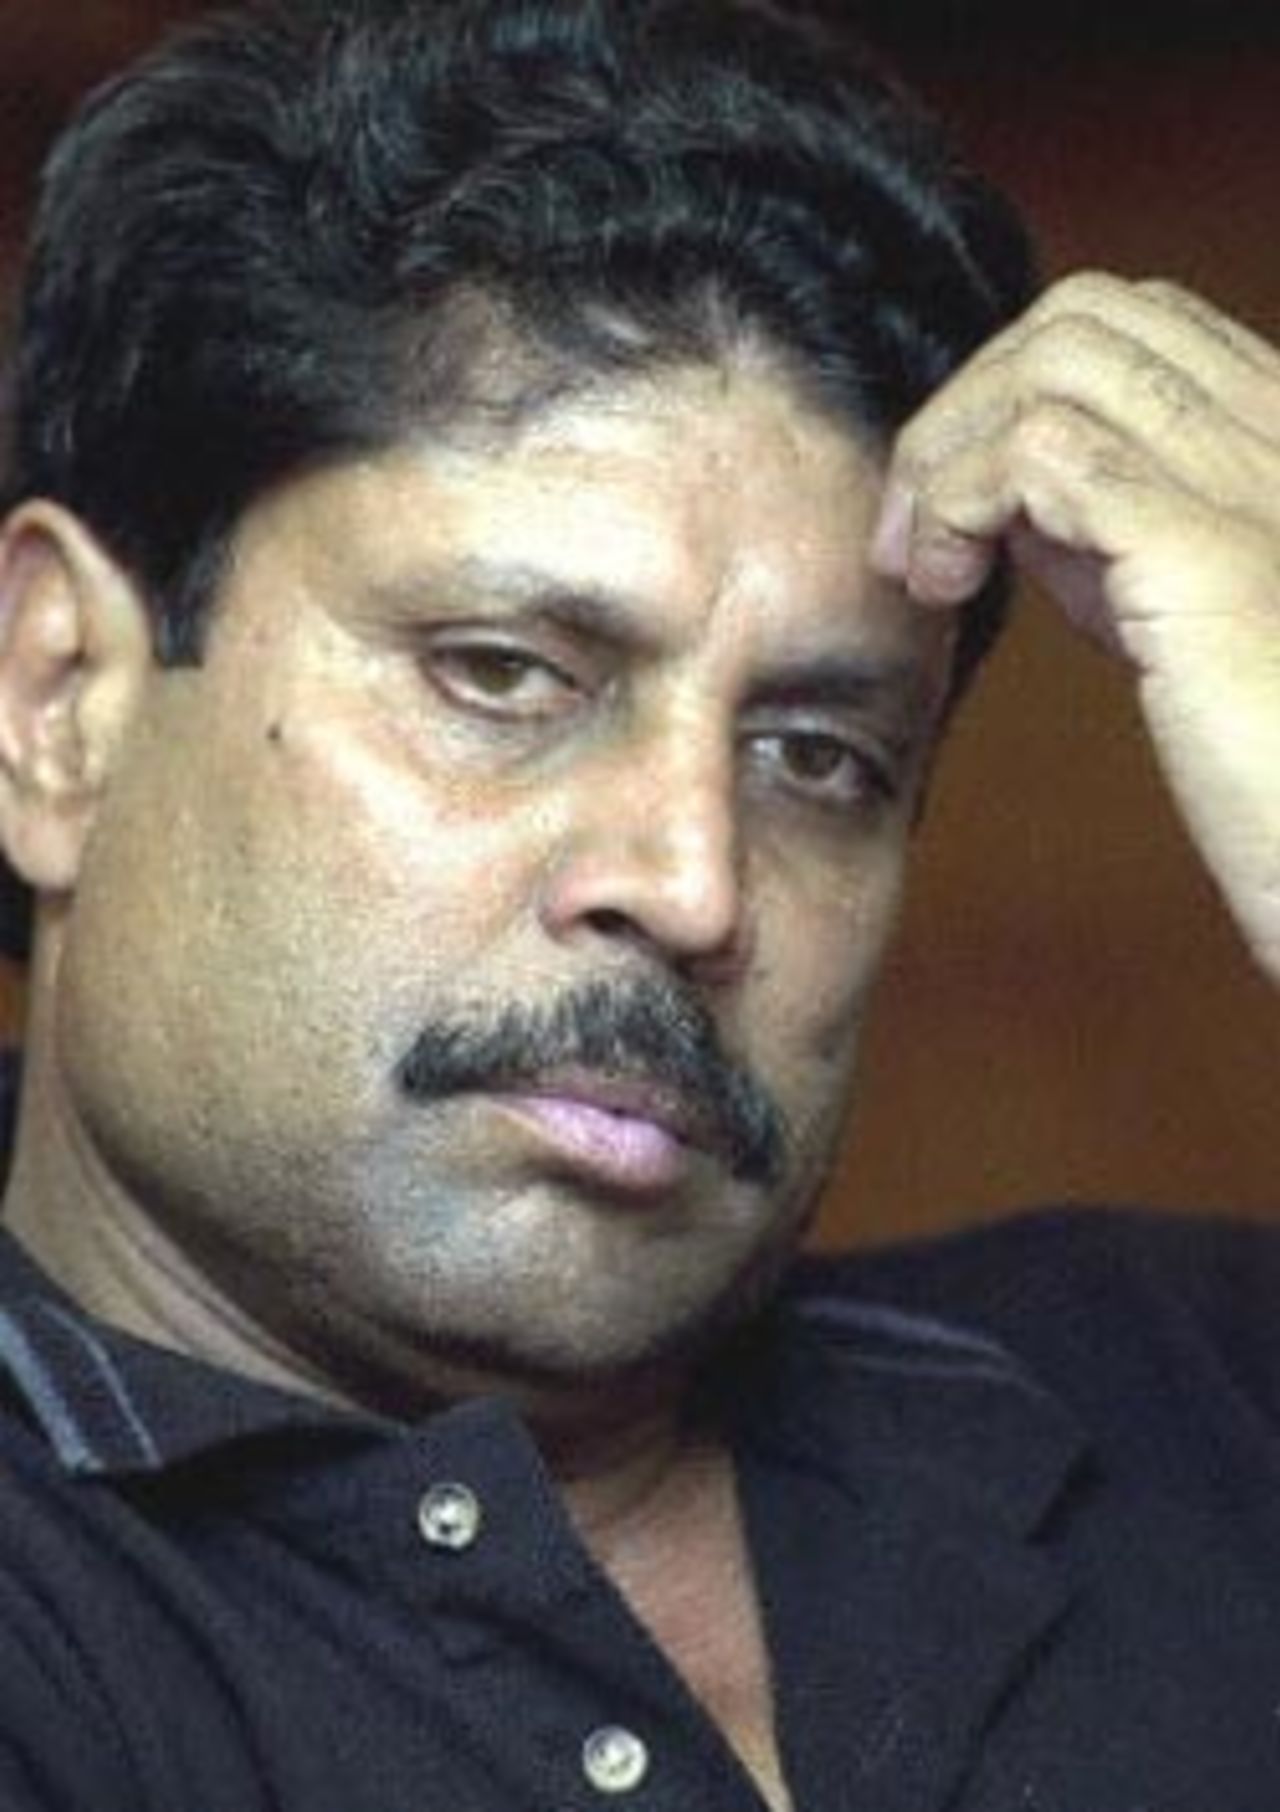 India's national cricket team coach Kapil Dev gestures during a function at a New Delhi hotel, 26 April 2000. Dev, who had earlier suggested that all of India's international matches be cancelled until allegations of match fixing had been investigated, will attend a meeting 27 April of Indian cricket administrators, players and Sports Minister Sukhdev Singh Dhindsa to discuss the fallout after South African skipper Hansie Cronje was sacked over bribery charges.